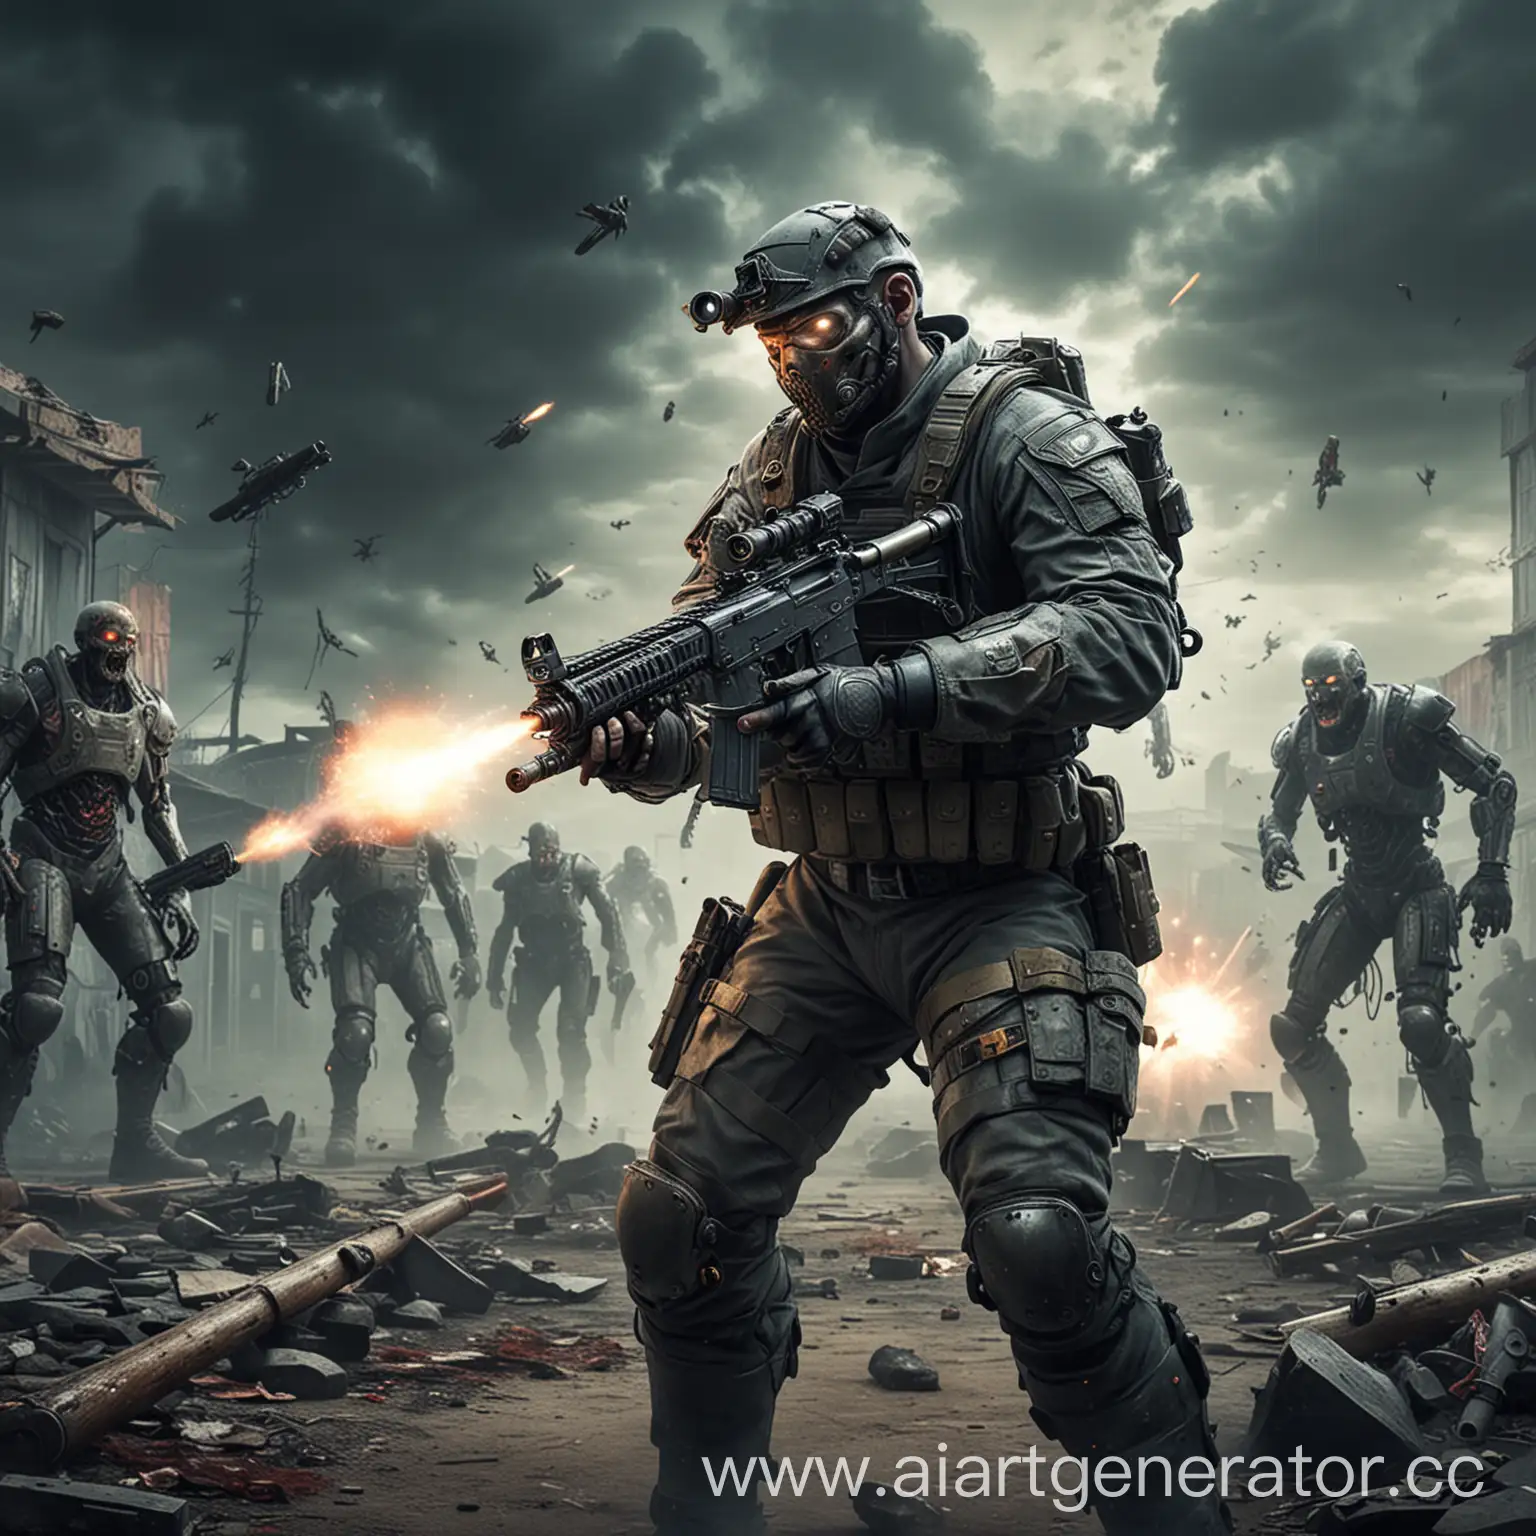 Futuristic-Soldier-Battling-Zombies-in-Apocalyptic-Warfare